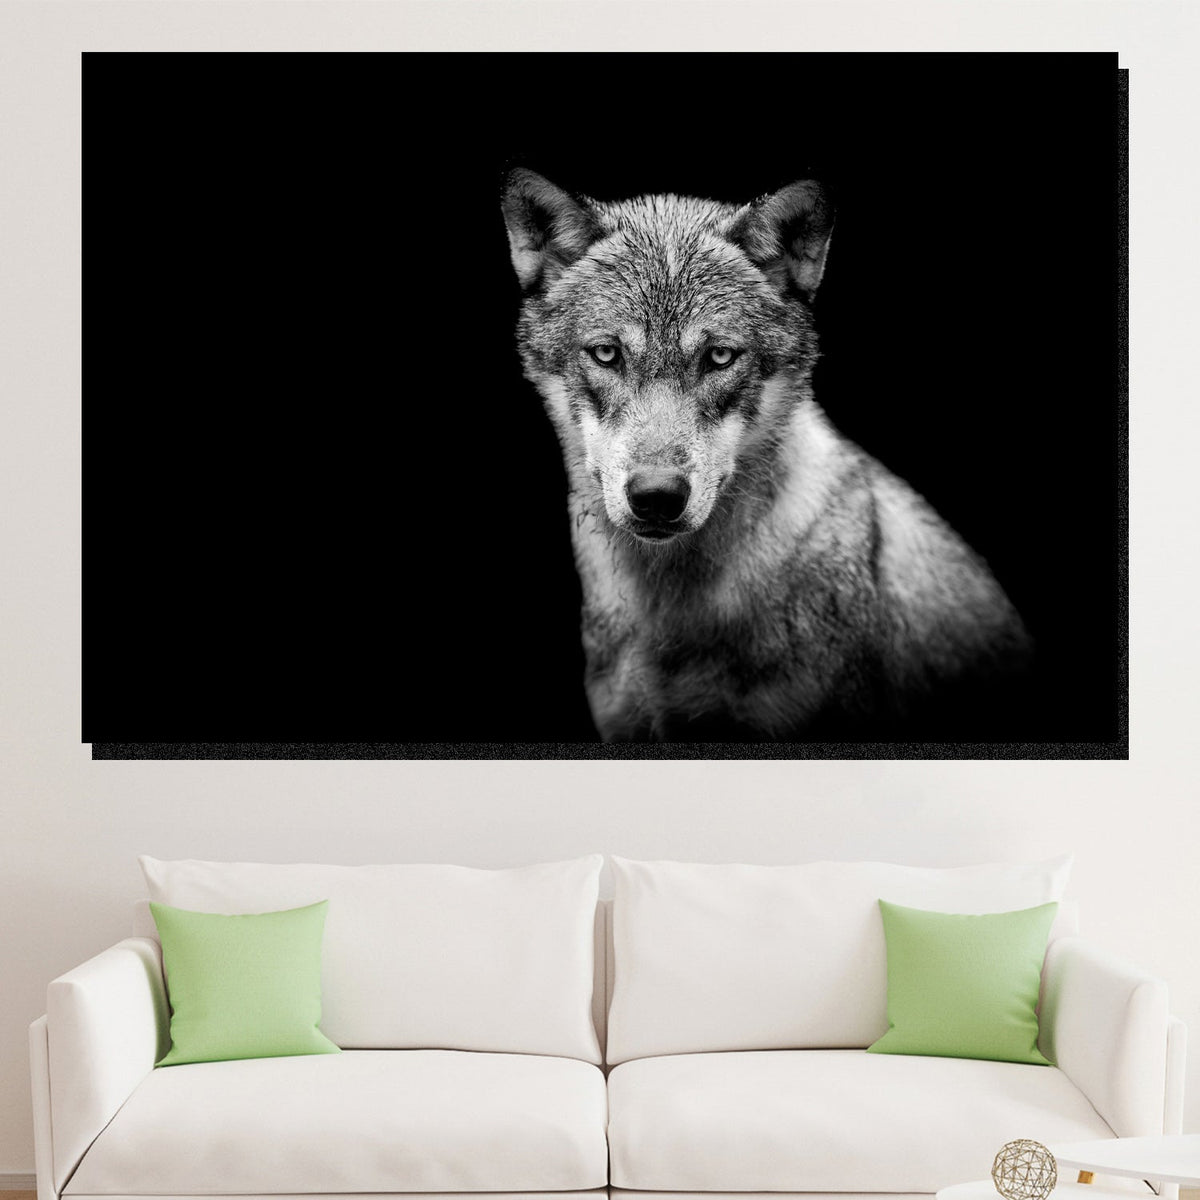 https://cdn.shopify.com/s/files/1/0387/9986/8044/products/YoungWolfCanvasArtprintStretched-4.jpg